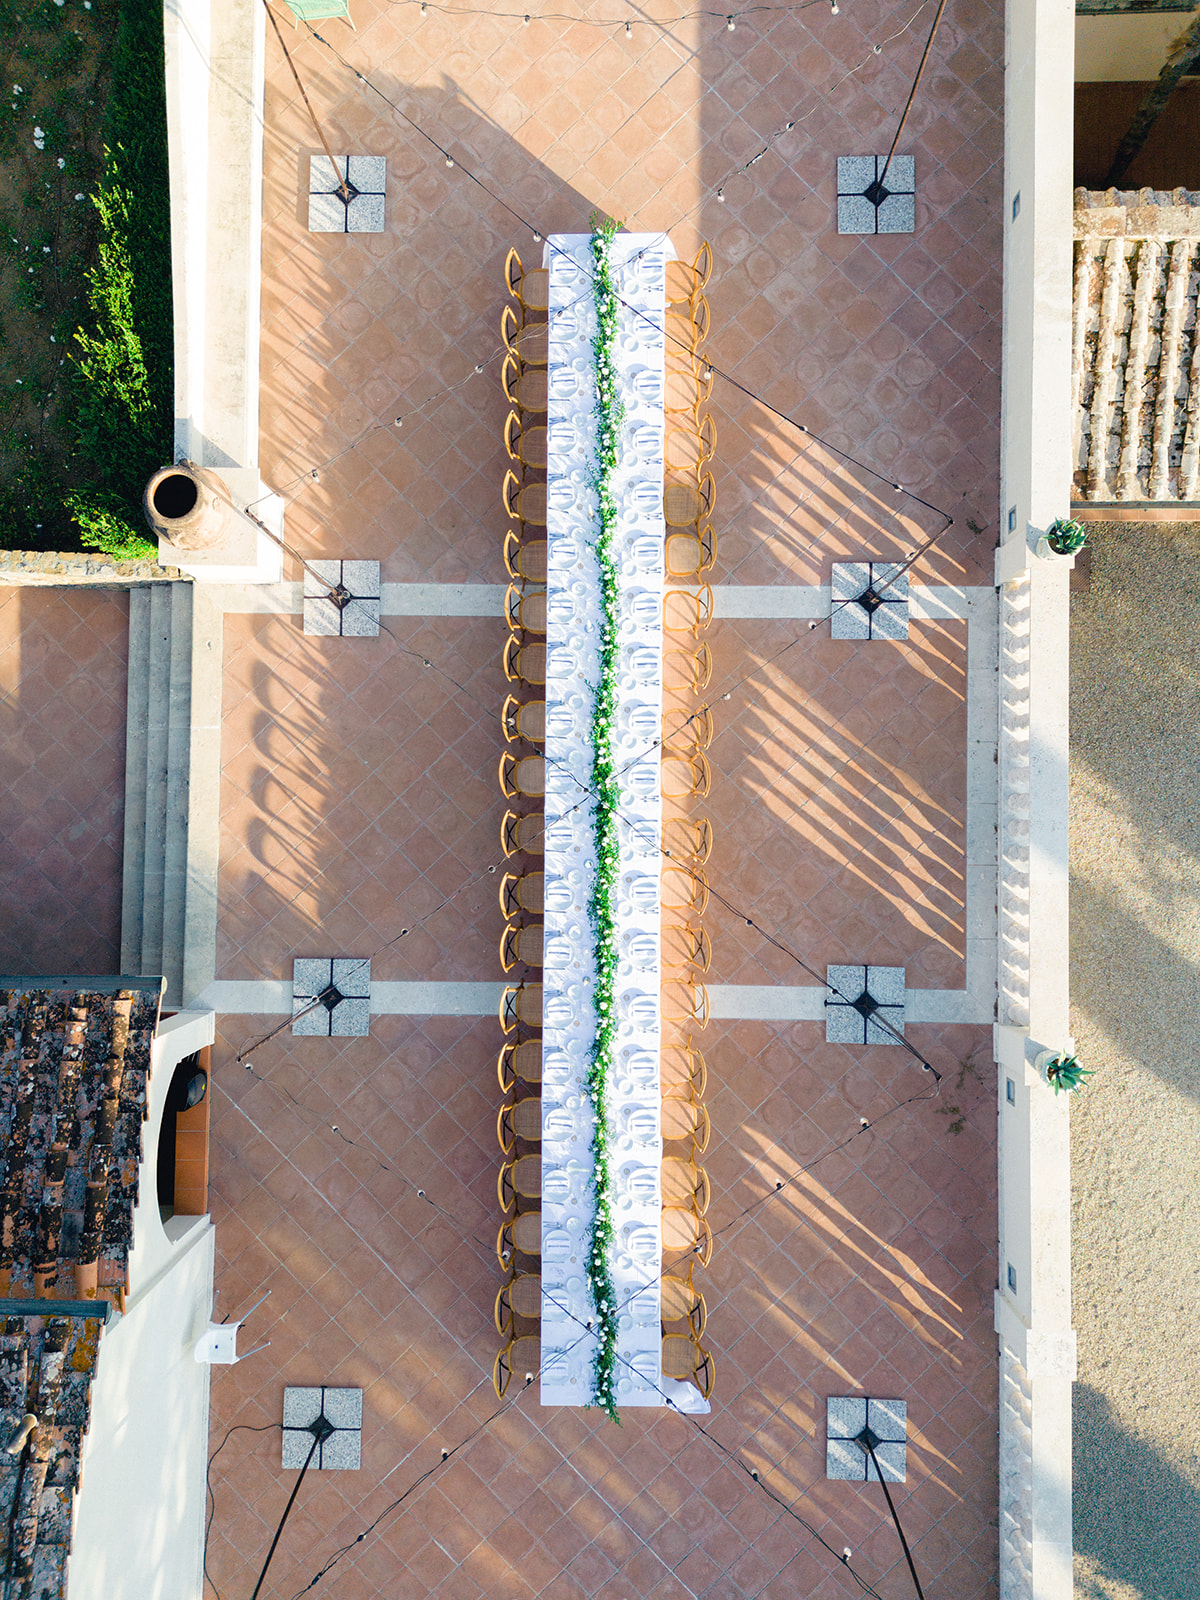 The imperial table for Georgia and Tom's wedding dinner seen from above